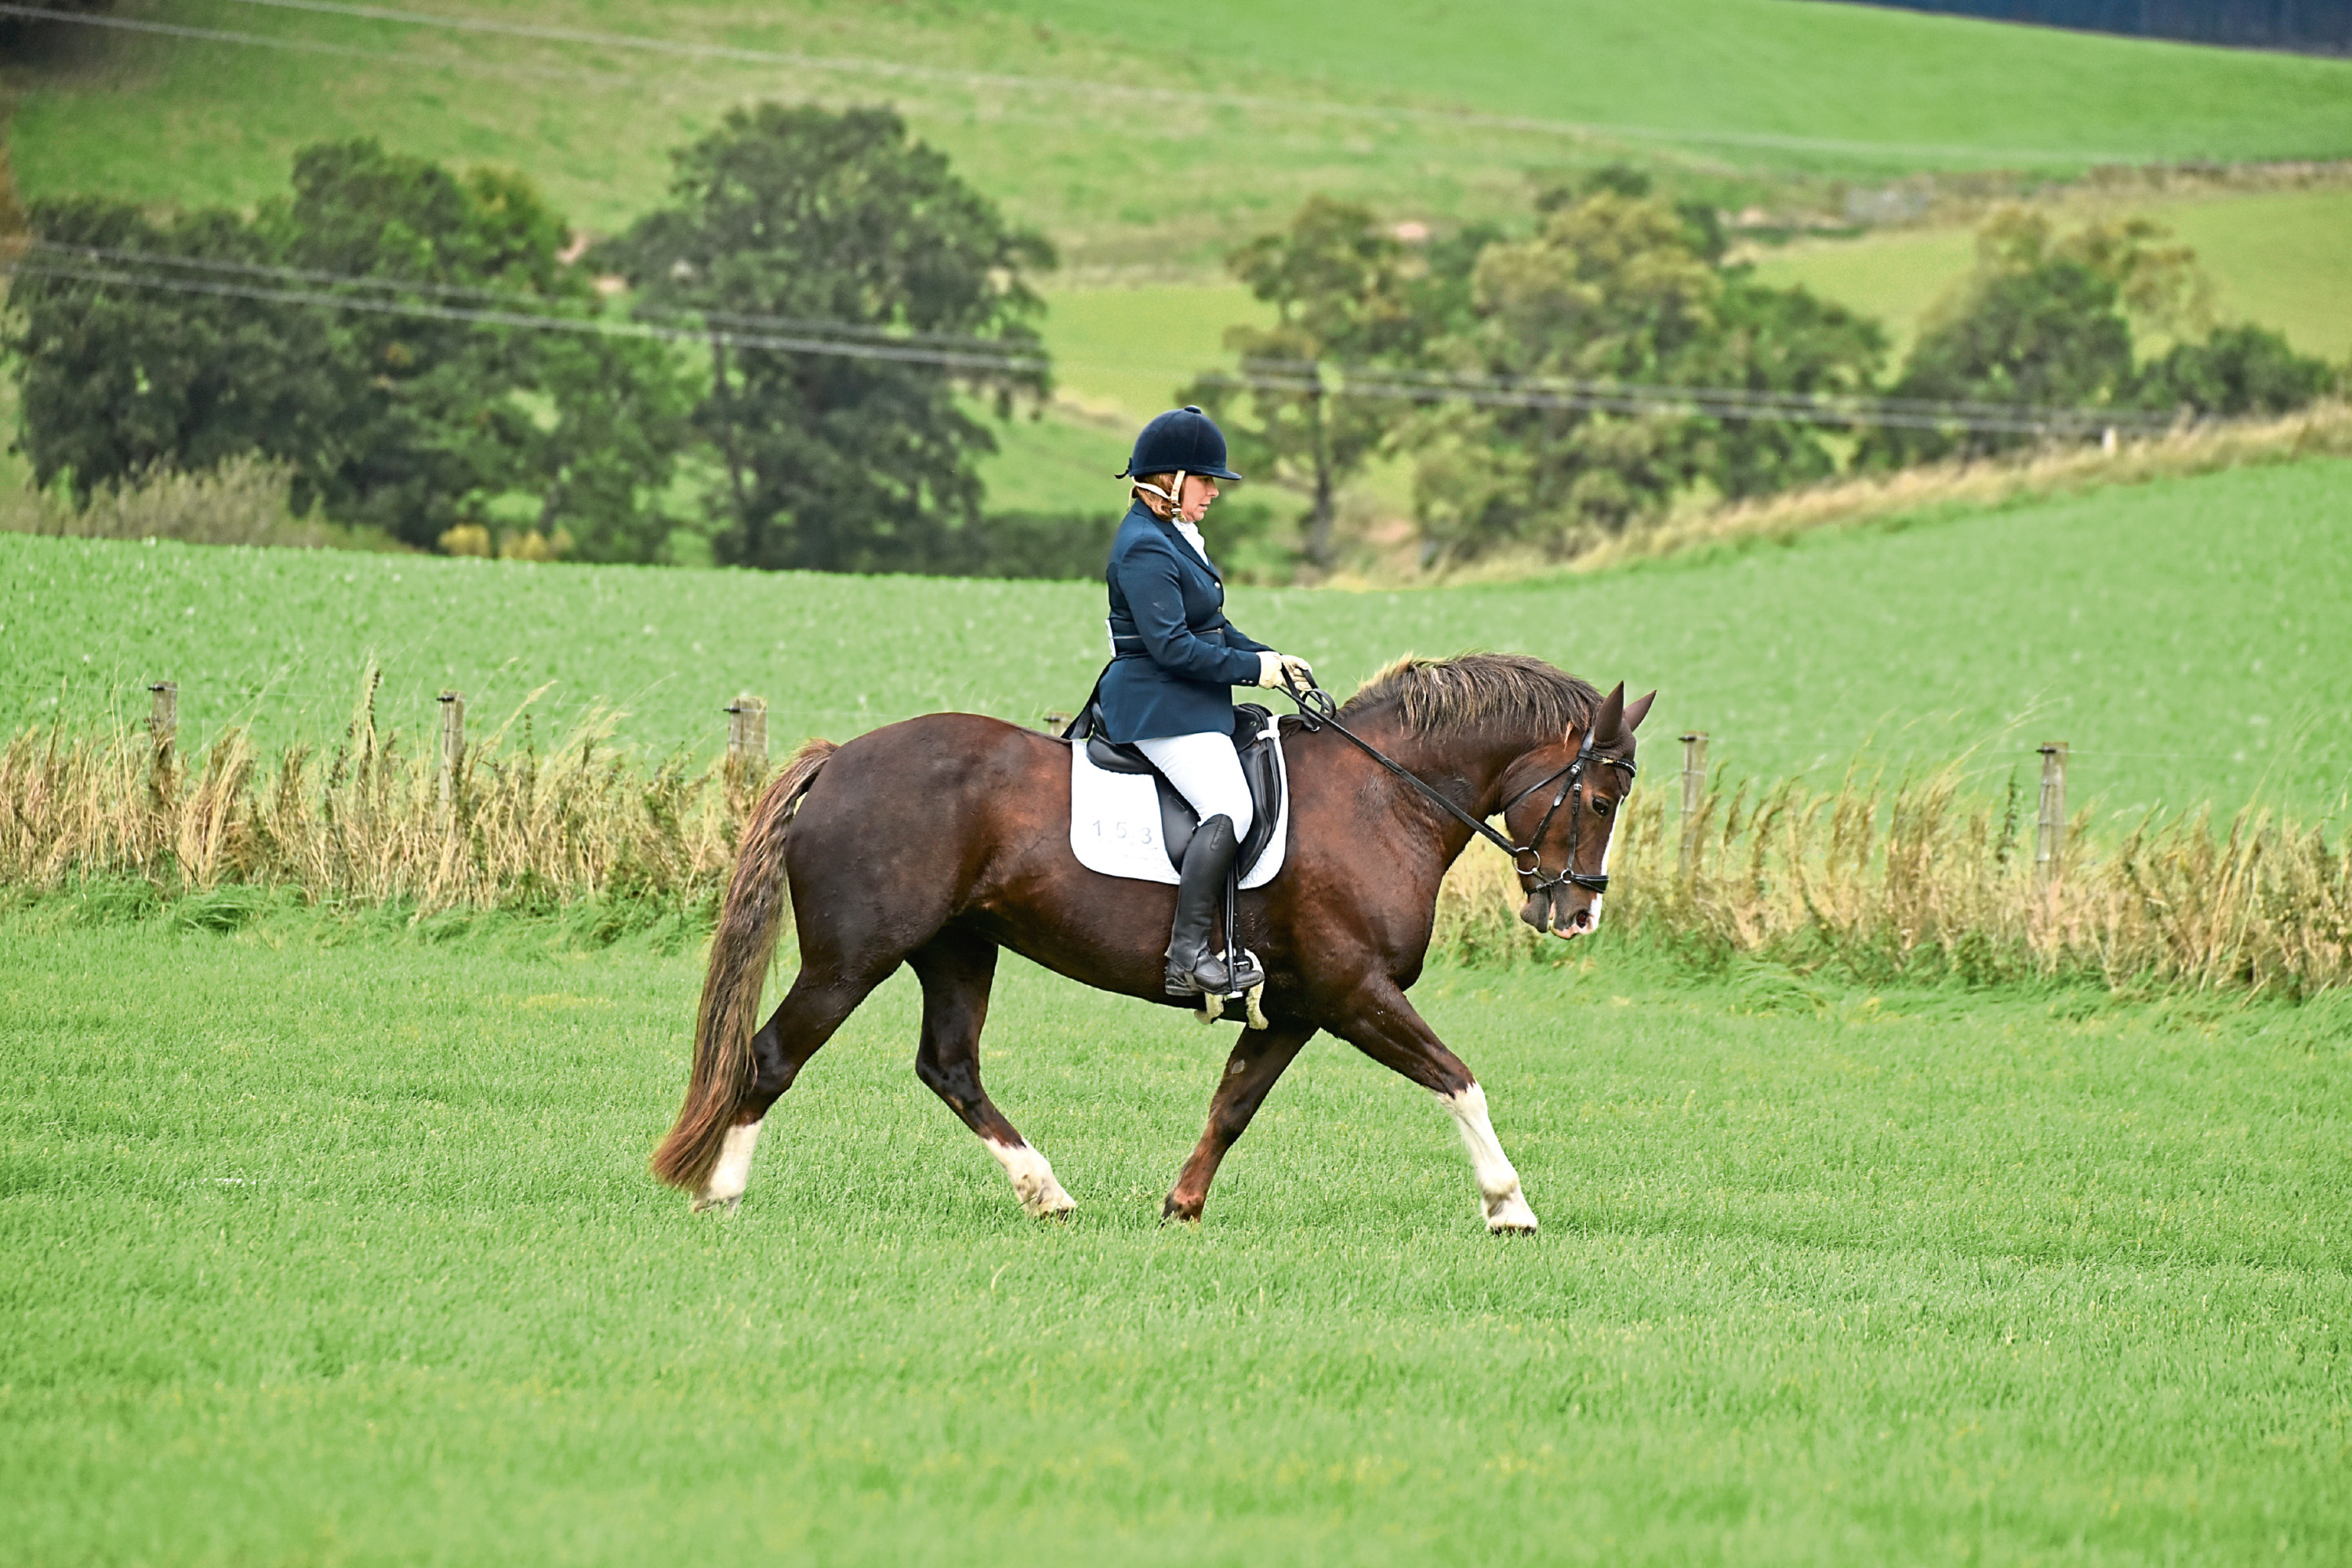 Julie Robertson, winner of the Riding Test event. Picture by Stephen Hammond Photograpy.